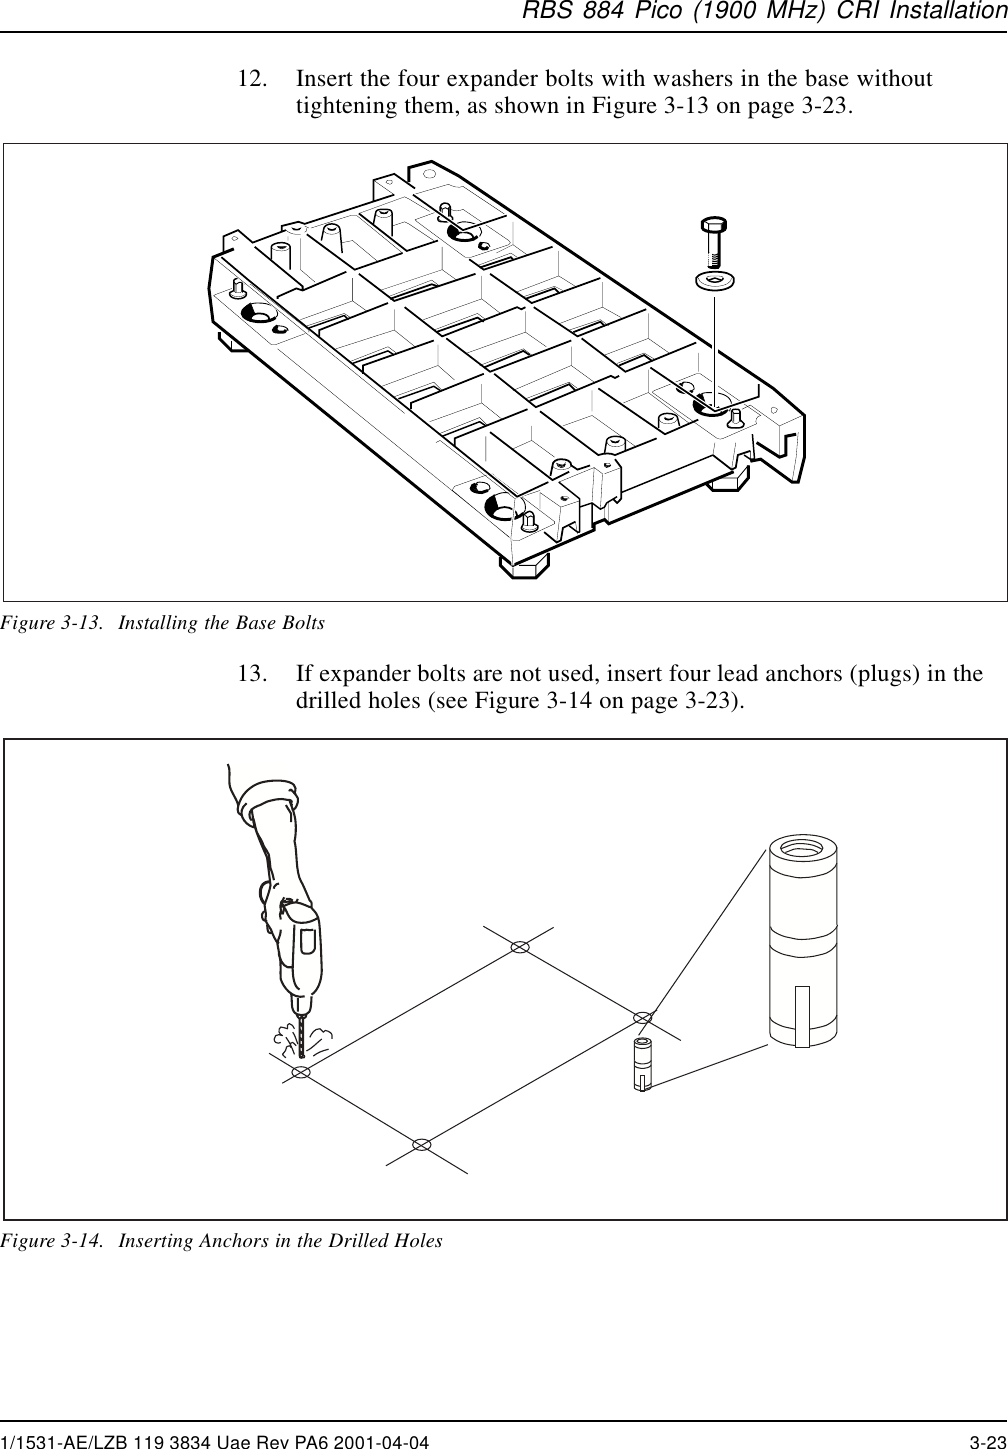 RBS 884 Pico (1900 MHz) CRI Installation12. Insert the four expander bolts with washers in the base withouttightening them, as shown in Figure 3-13 on page 3-23.Figure 3-13. Installing the Base Bolts13. If expander bolts are not used, insert four lead anchors (plugs) in thedrilled holes (see Figure 3-14 on page 3-23).Figure 3-14. Inserting Anchors in the Drilled Holes1/1531-AE/LZB 119 3834 Uae Rev PA6 2001-04-04 3-23